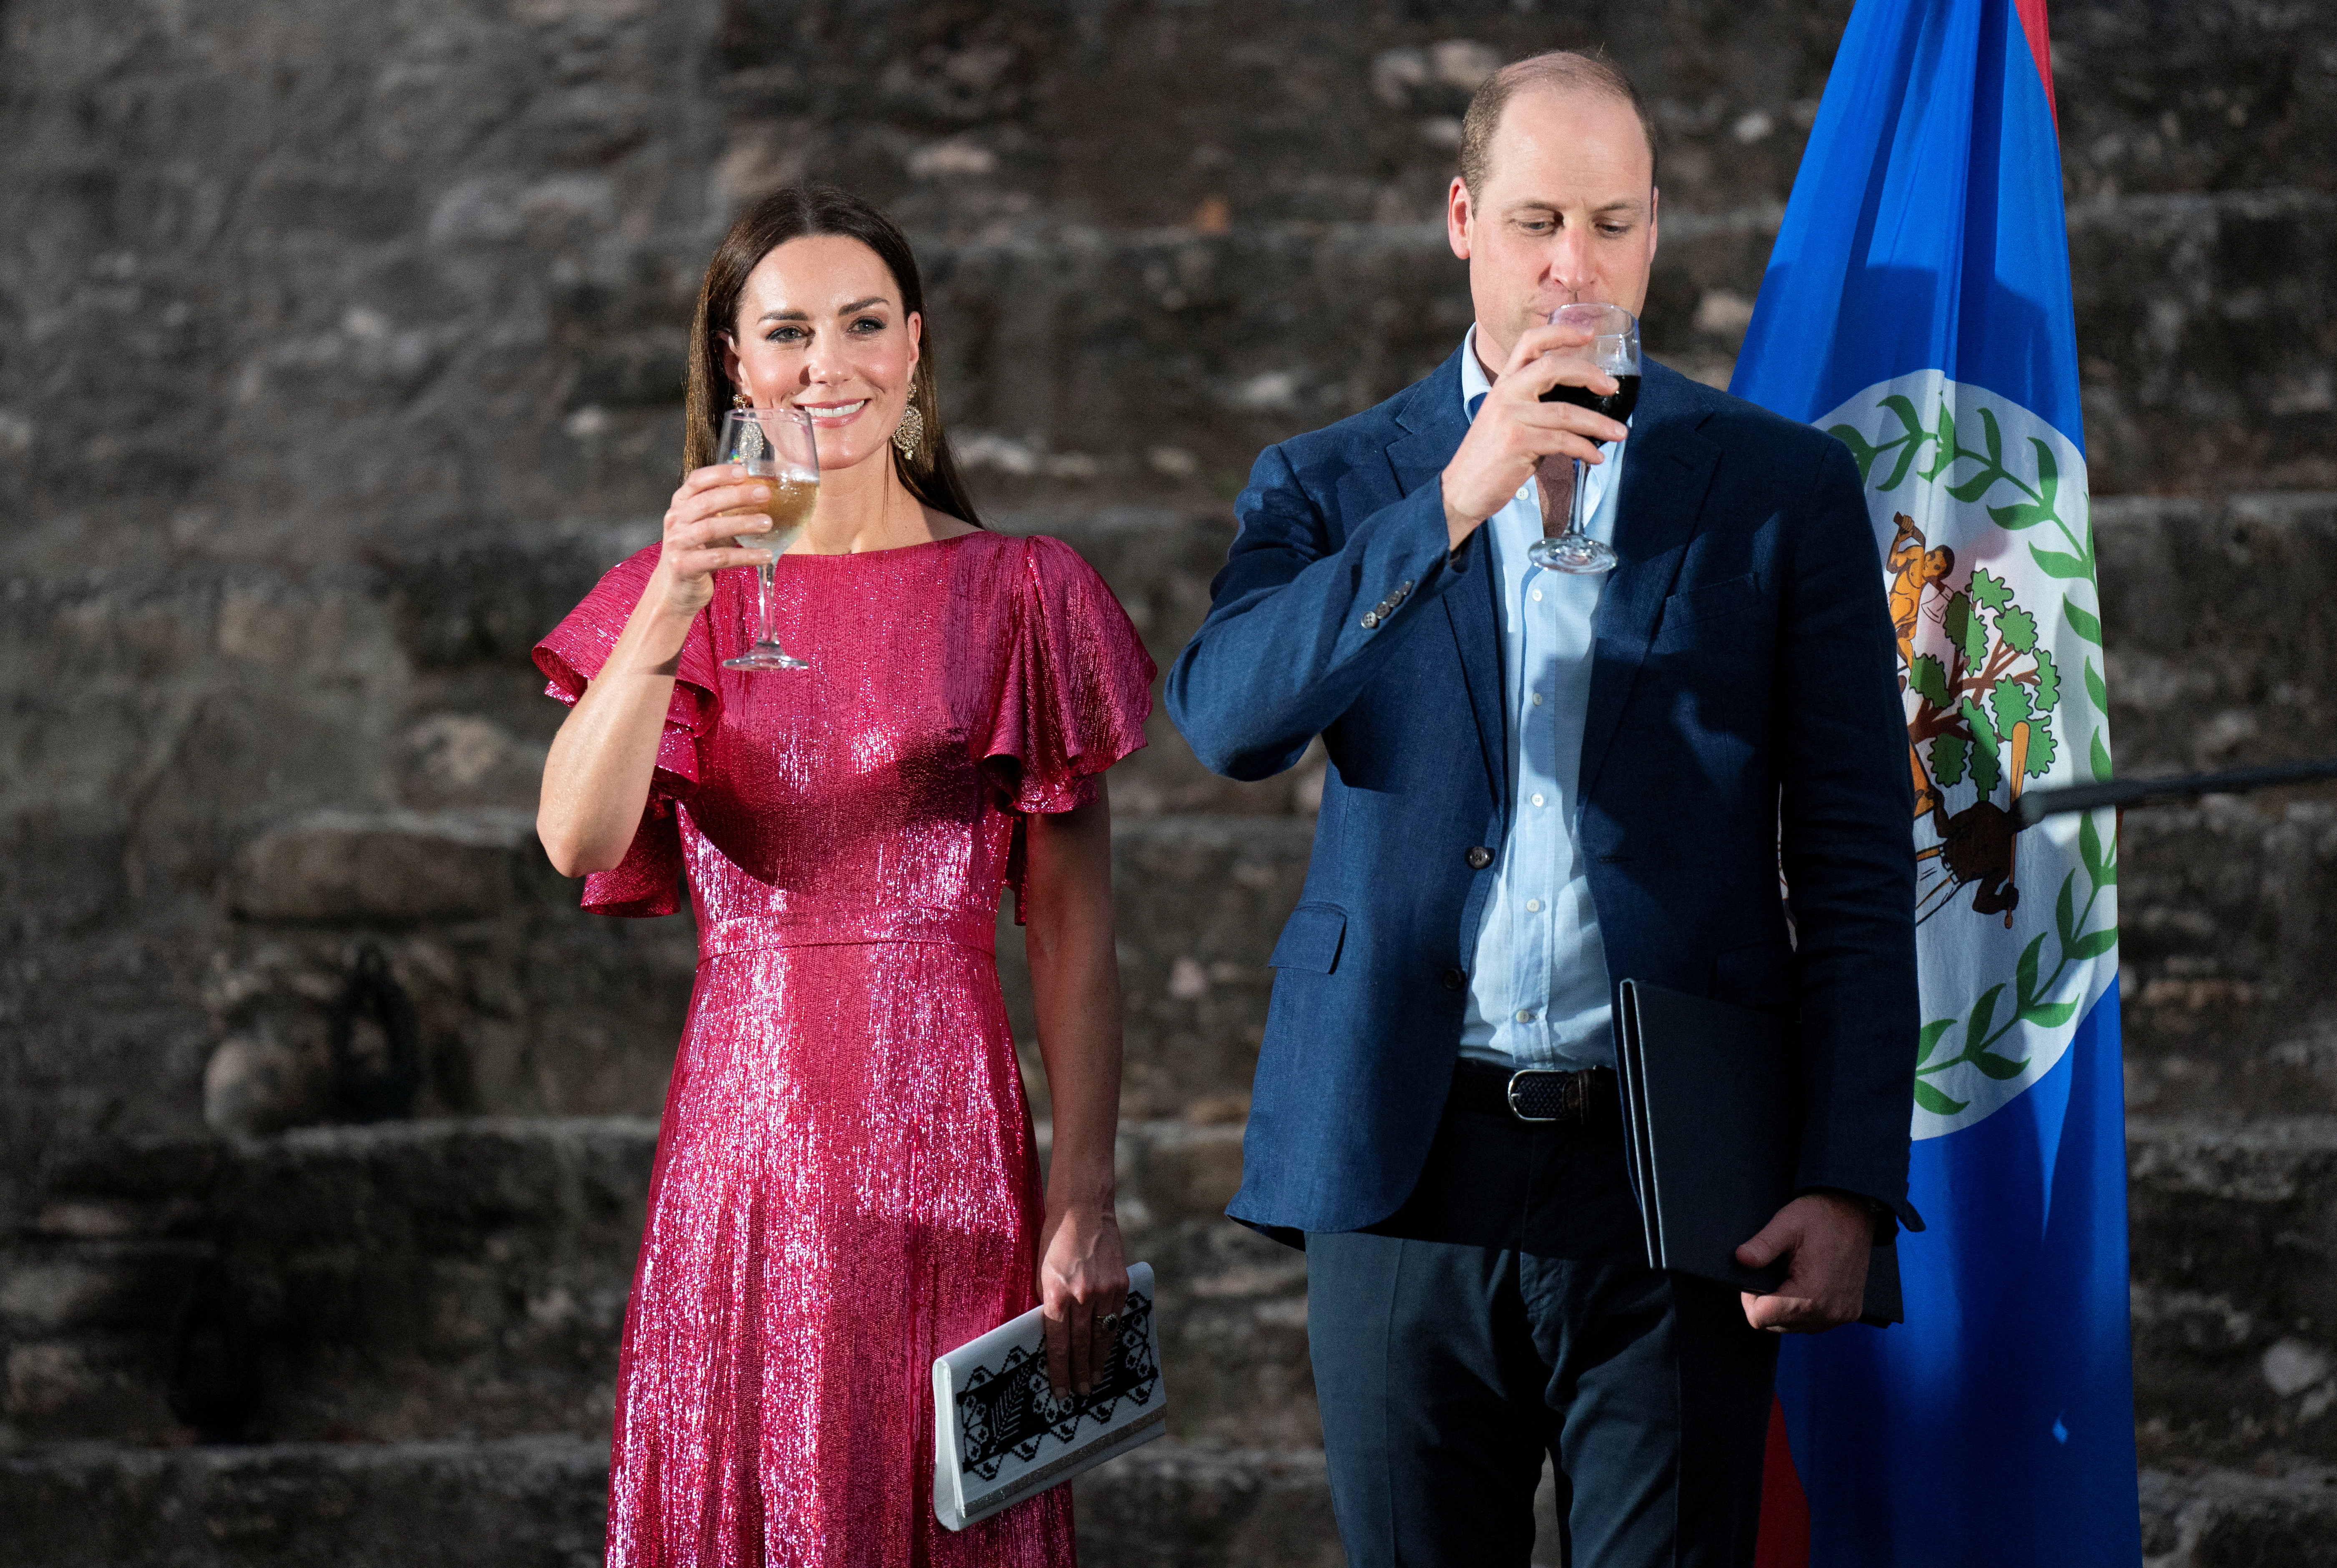 Prince William and Catherine, Duchess of Cambridge visit Belize